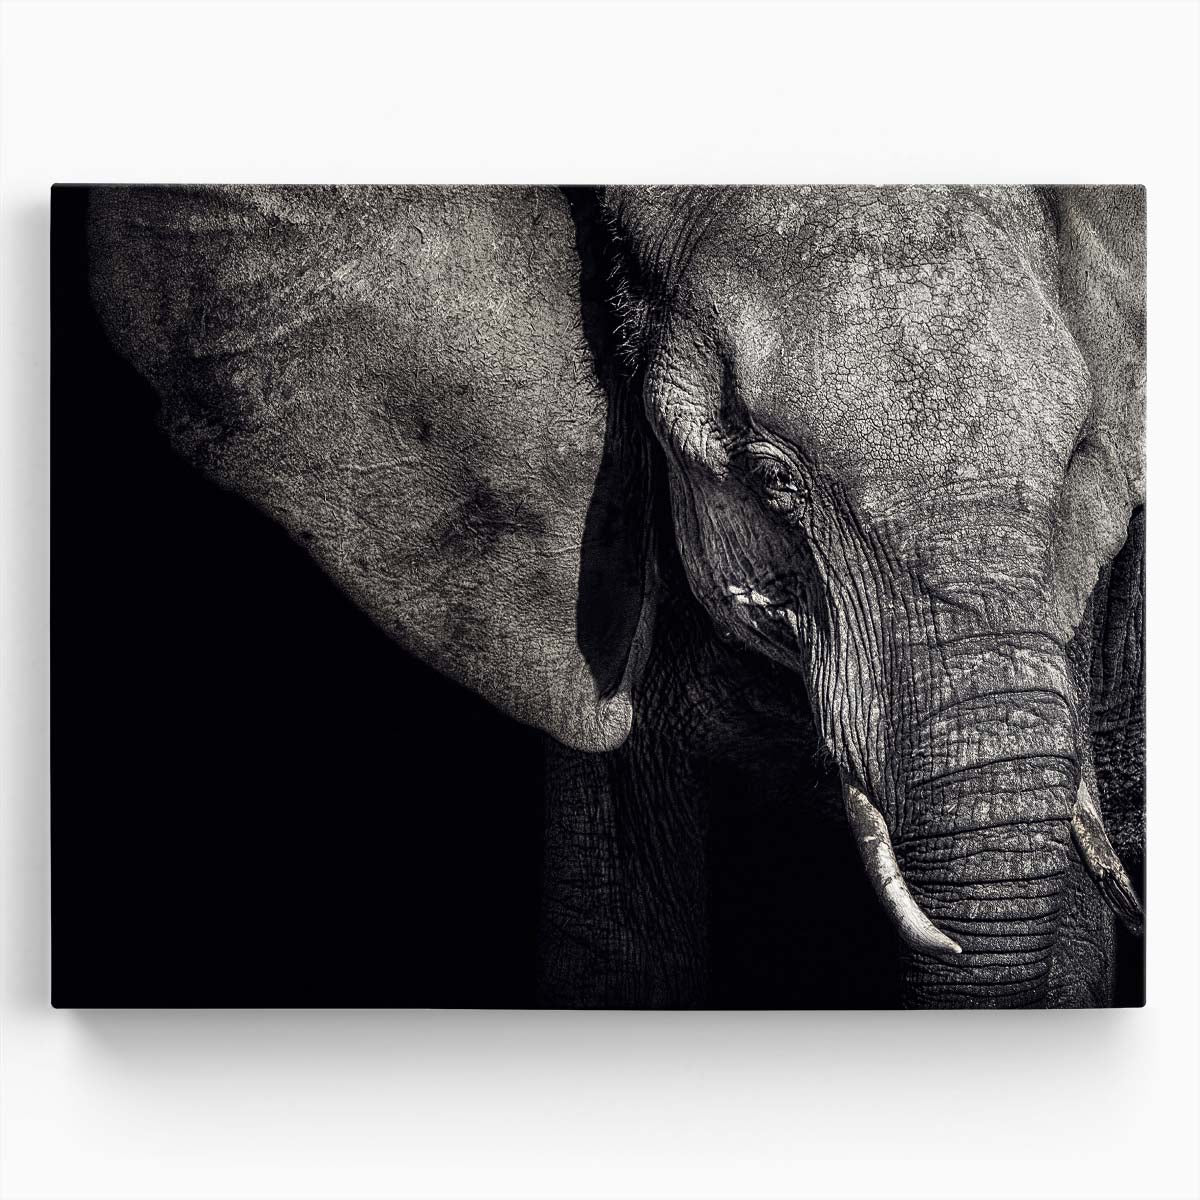 Monochrome African Elephant Matriarch Wall Art by Luxuriance Designs. Made in USA.